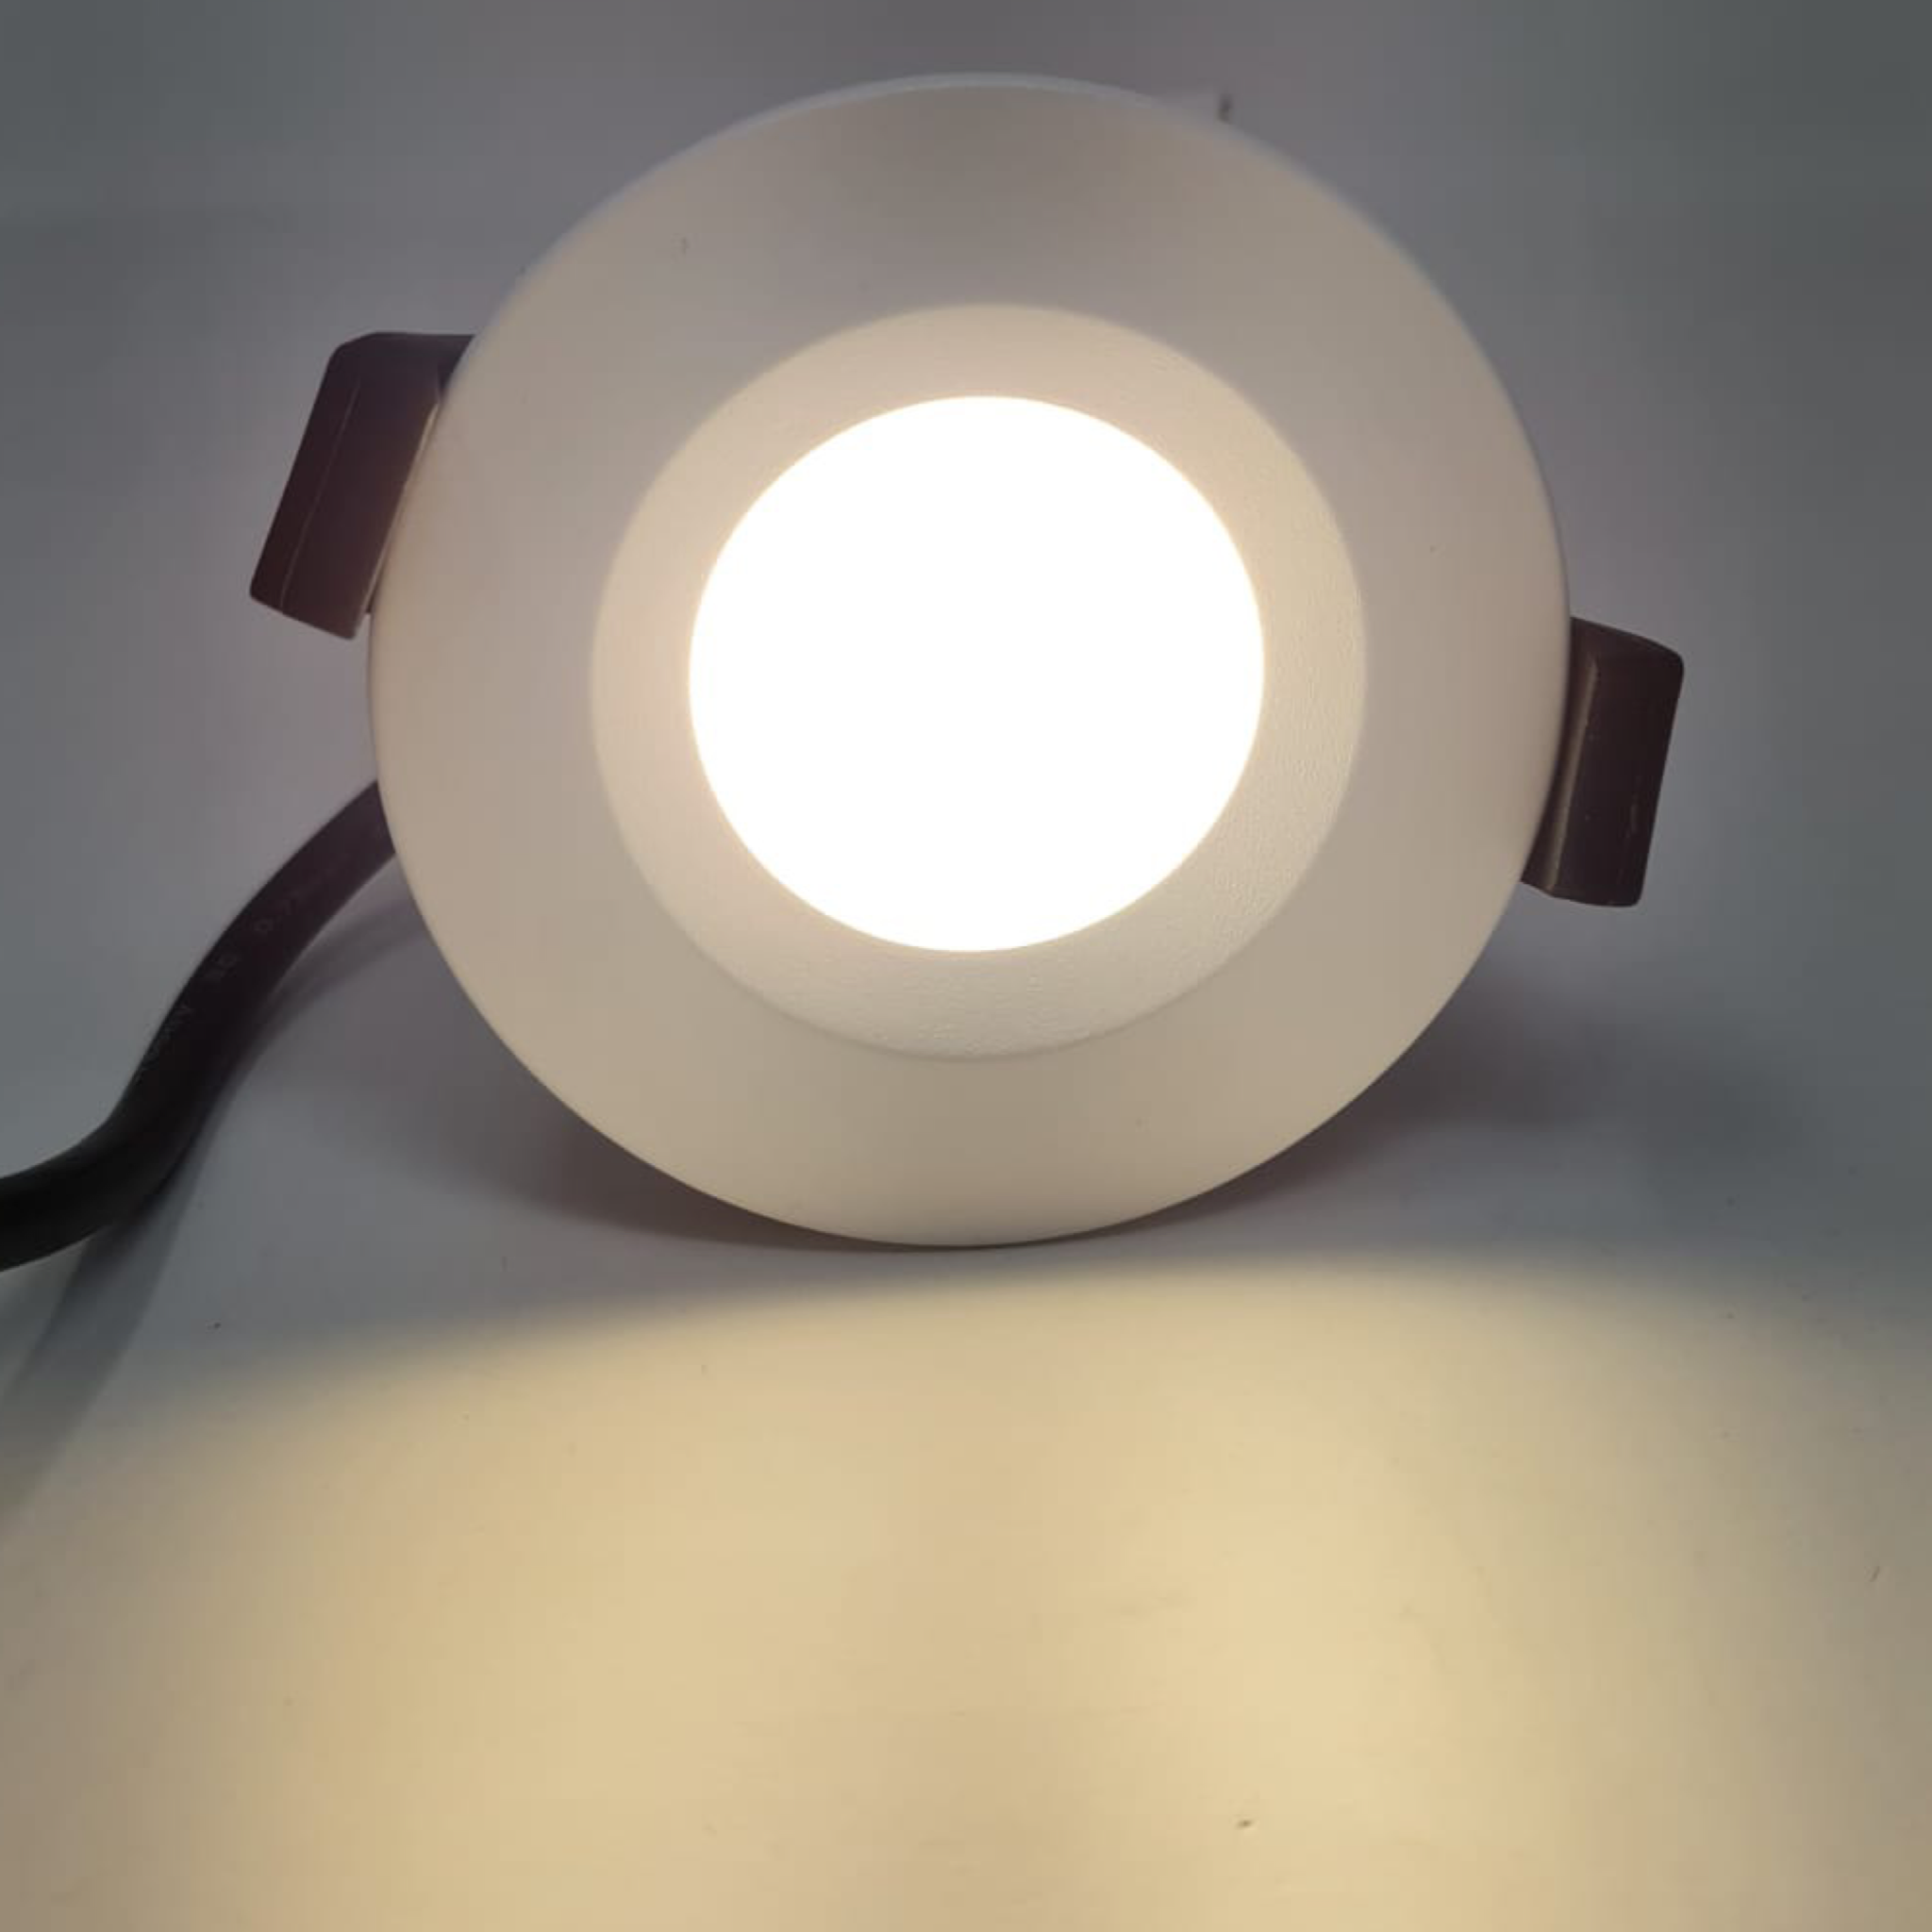 Waterproof Fire Rated Dimmable Downlight Recessed Ceiling IP65 UKEW Lighting